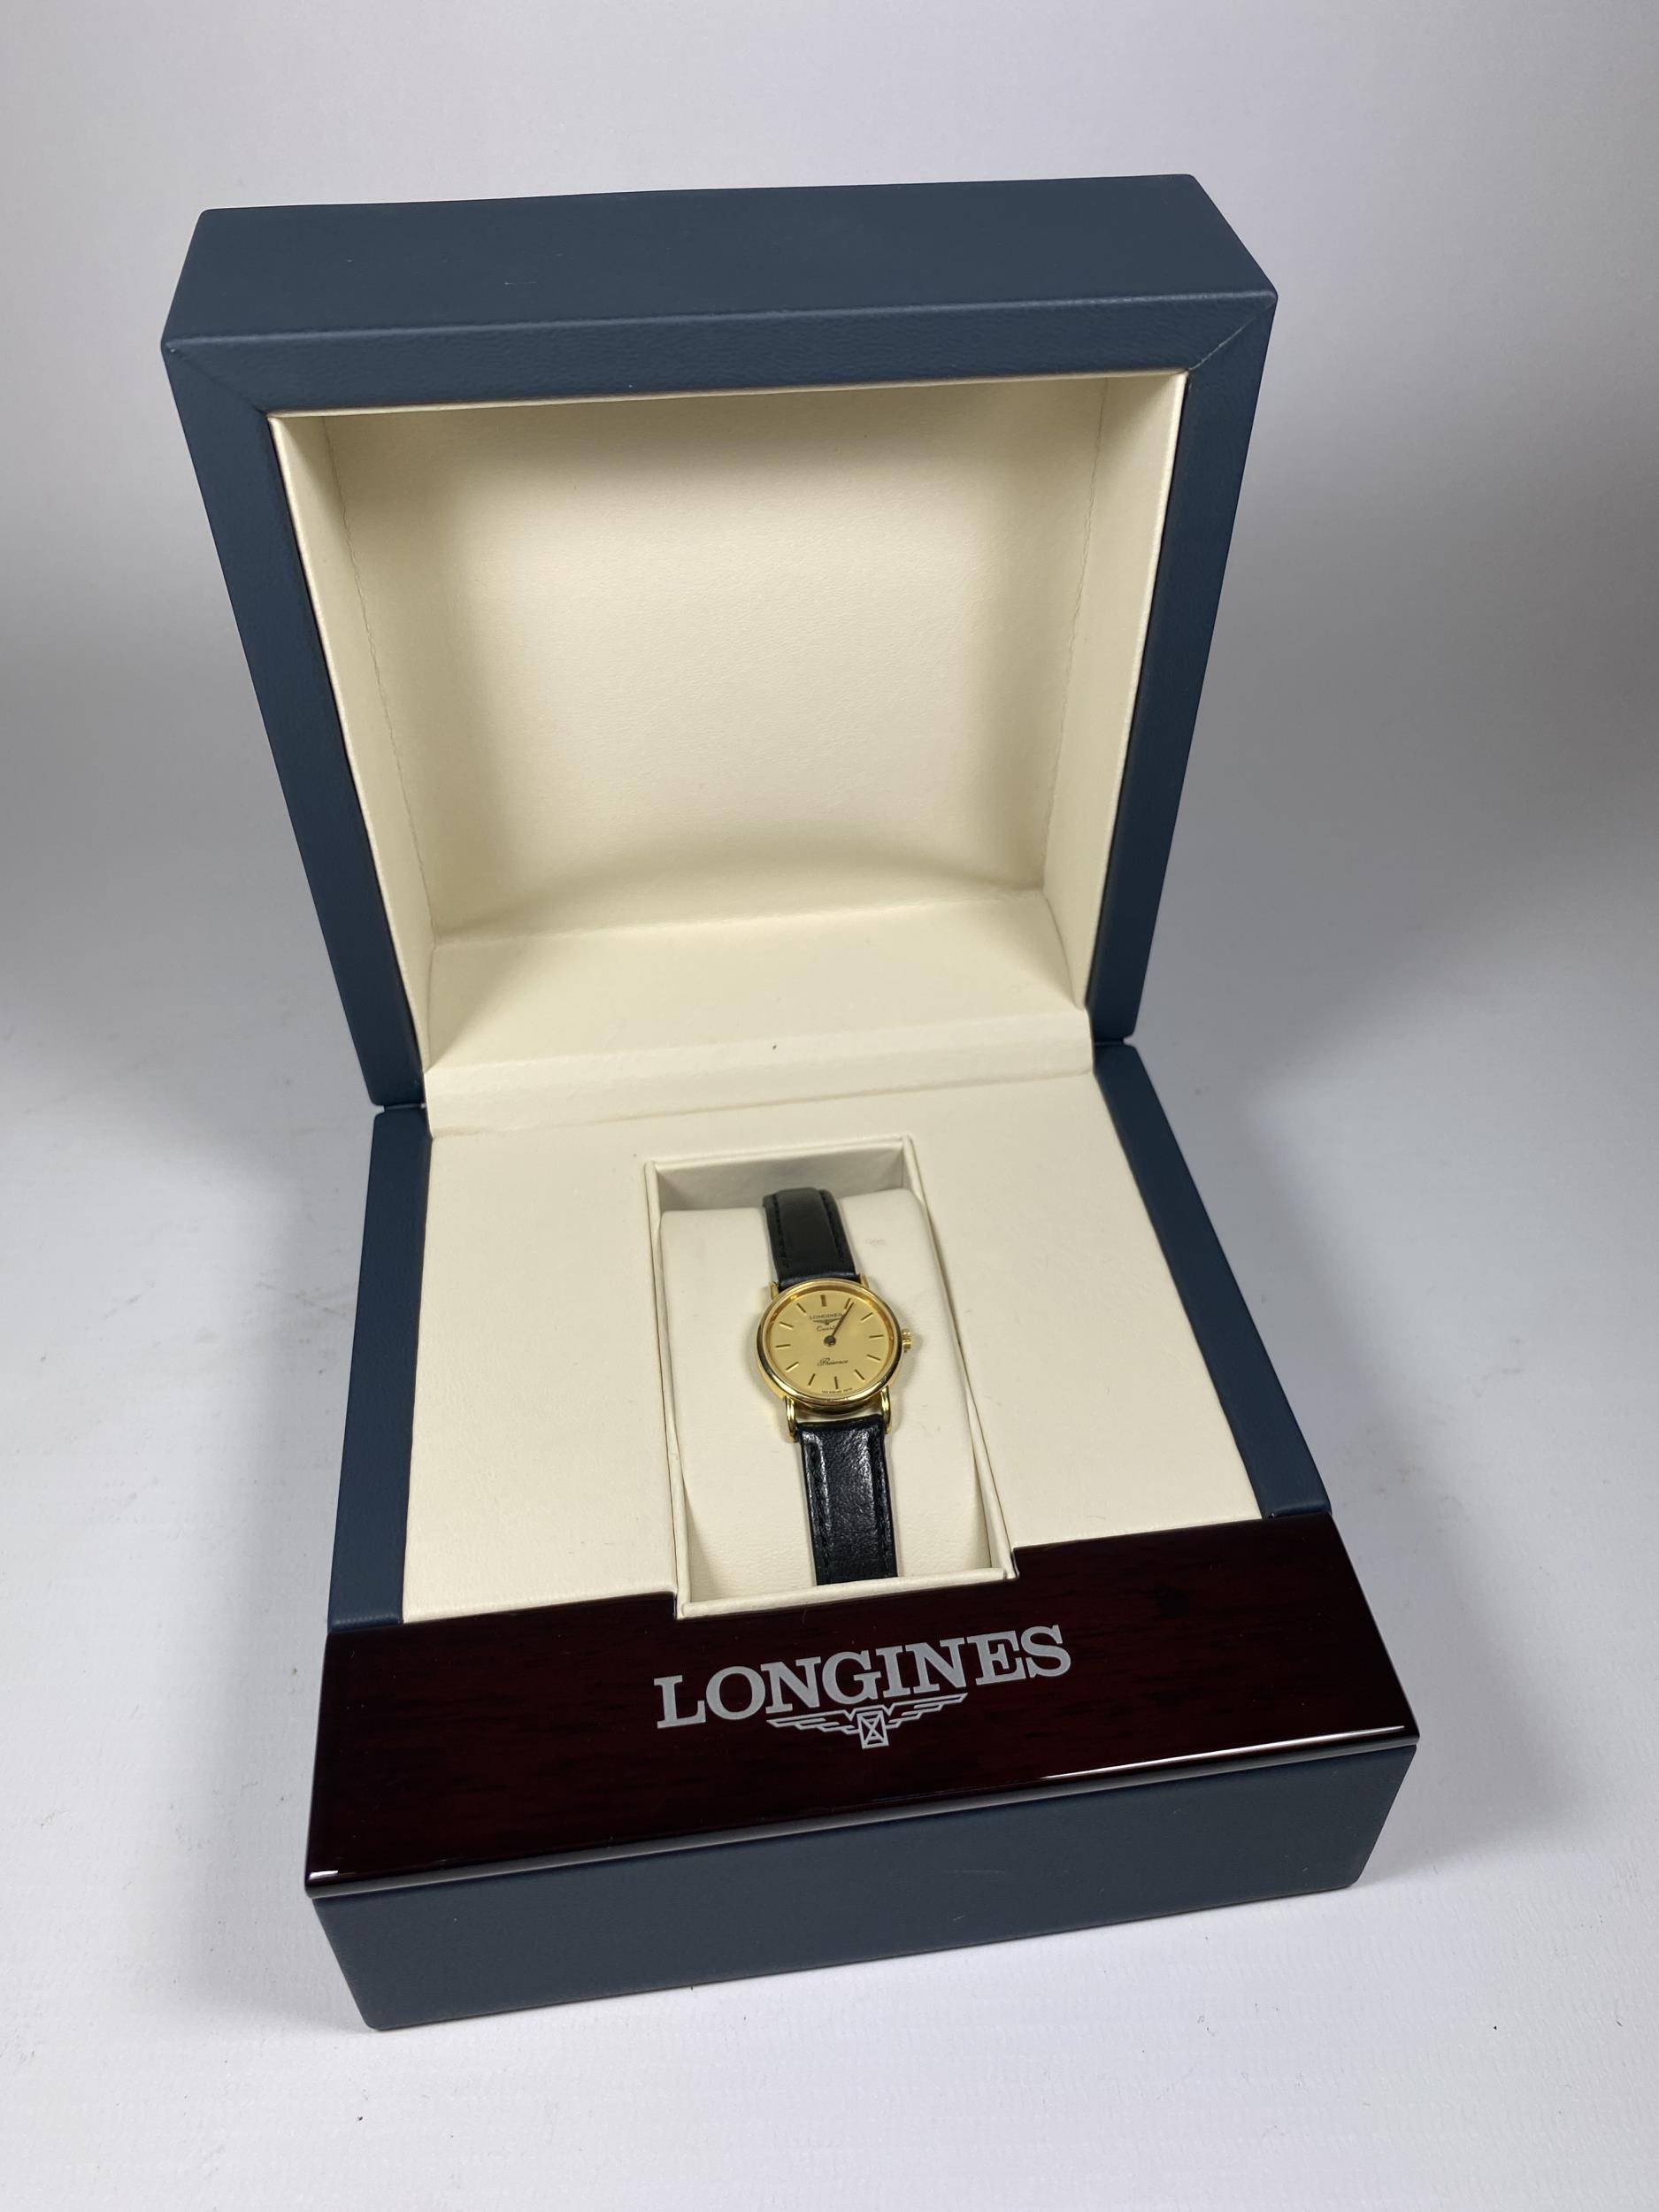 A LONGINES PRESENCE QUARTZ 9CT YELLOW GOLD CASED WATCH IN LONGINES BOX & RETAILER'S OUTER BOX